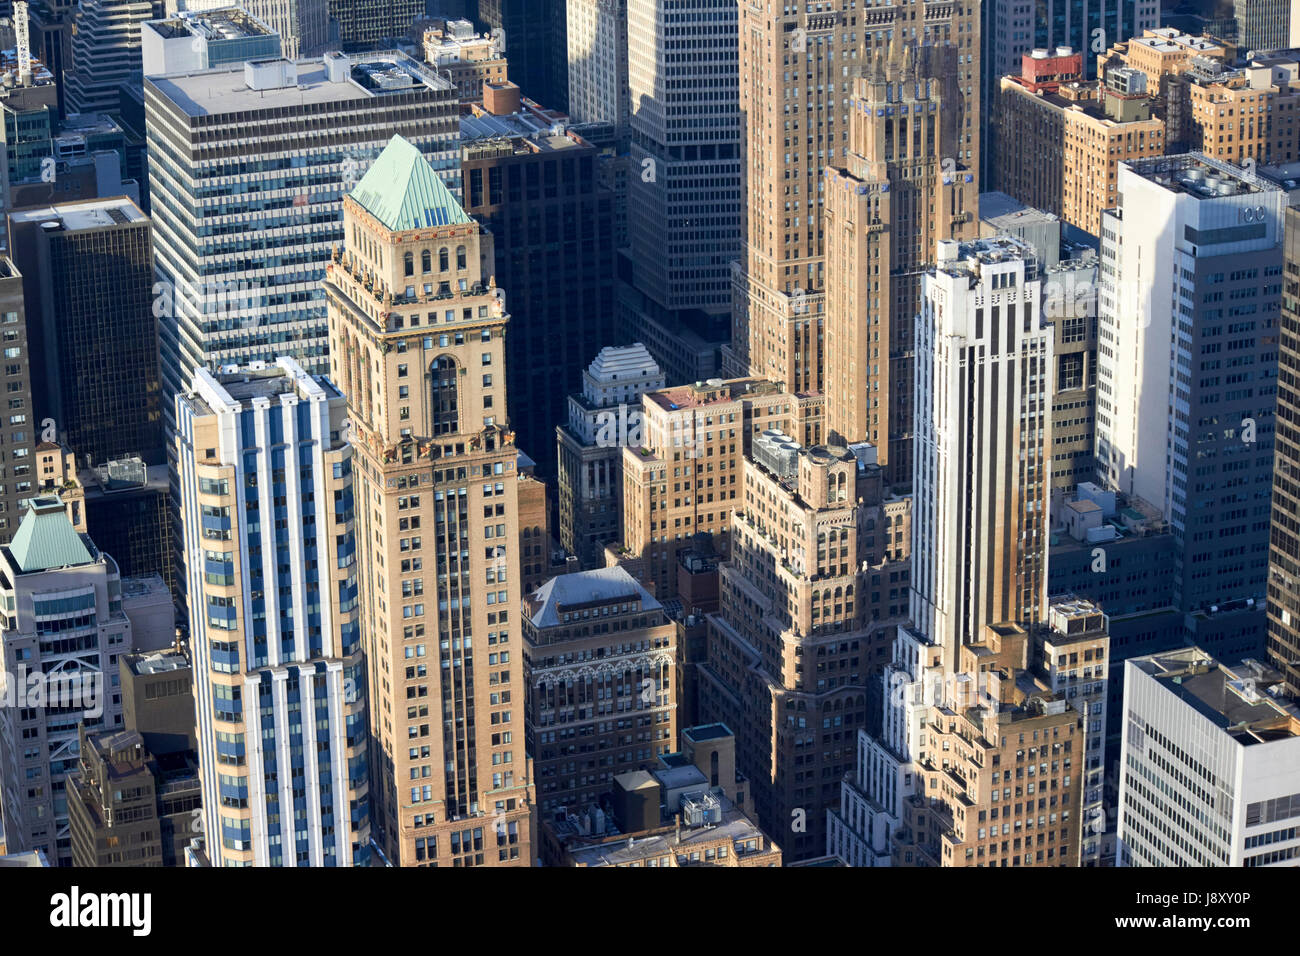 view over mixed era skyscrapers in midtown manhattan New York City USA including 425 fifth ave, mercantile building, johns-mansville building and lefc Stock Photo